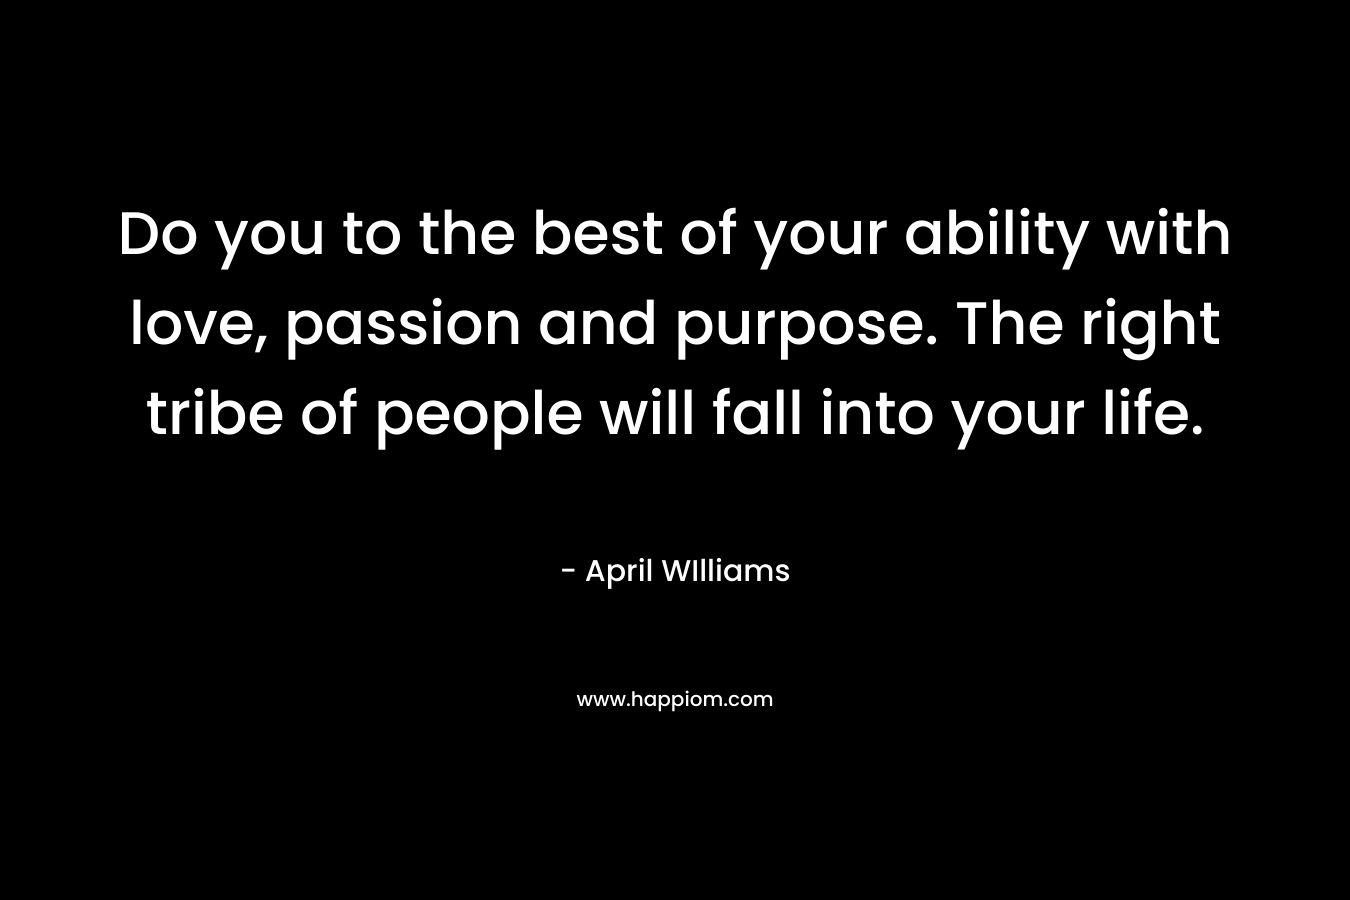 Do you to the best of your ability with love, passion and purpose. The right tribe of people will fall into your life. – April WIlliams